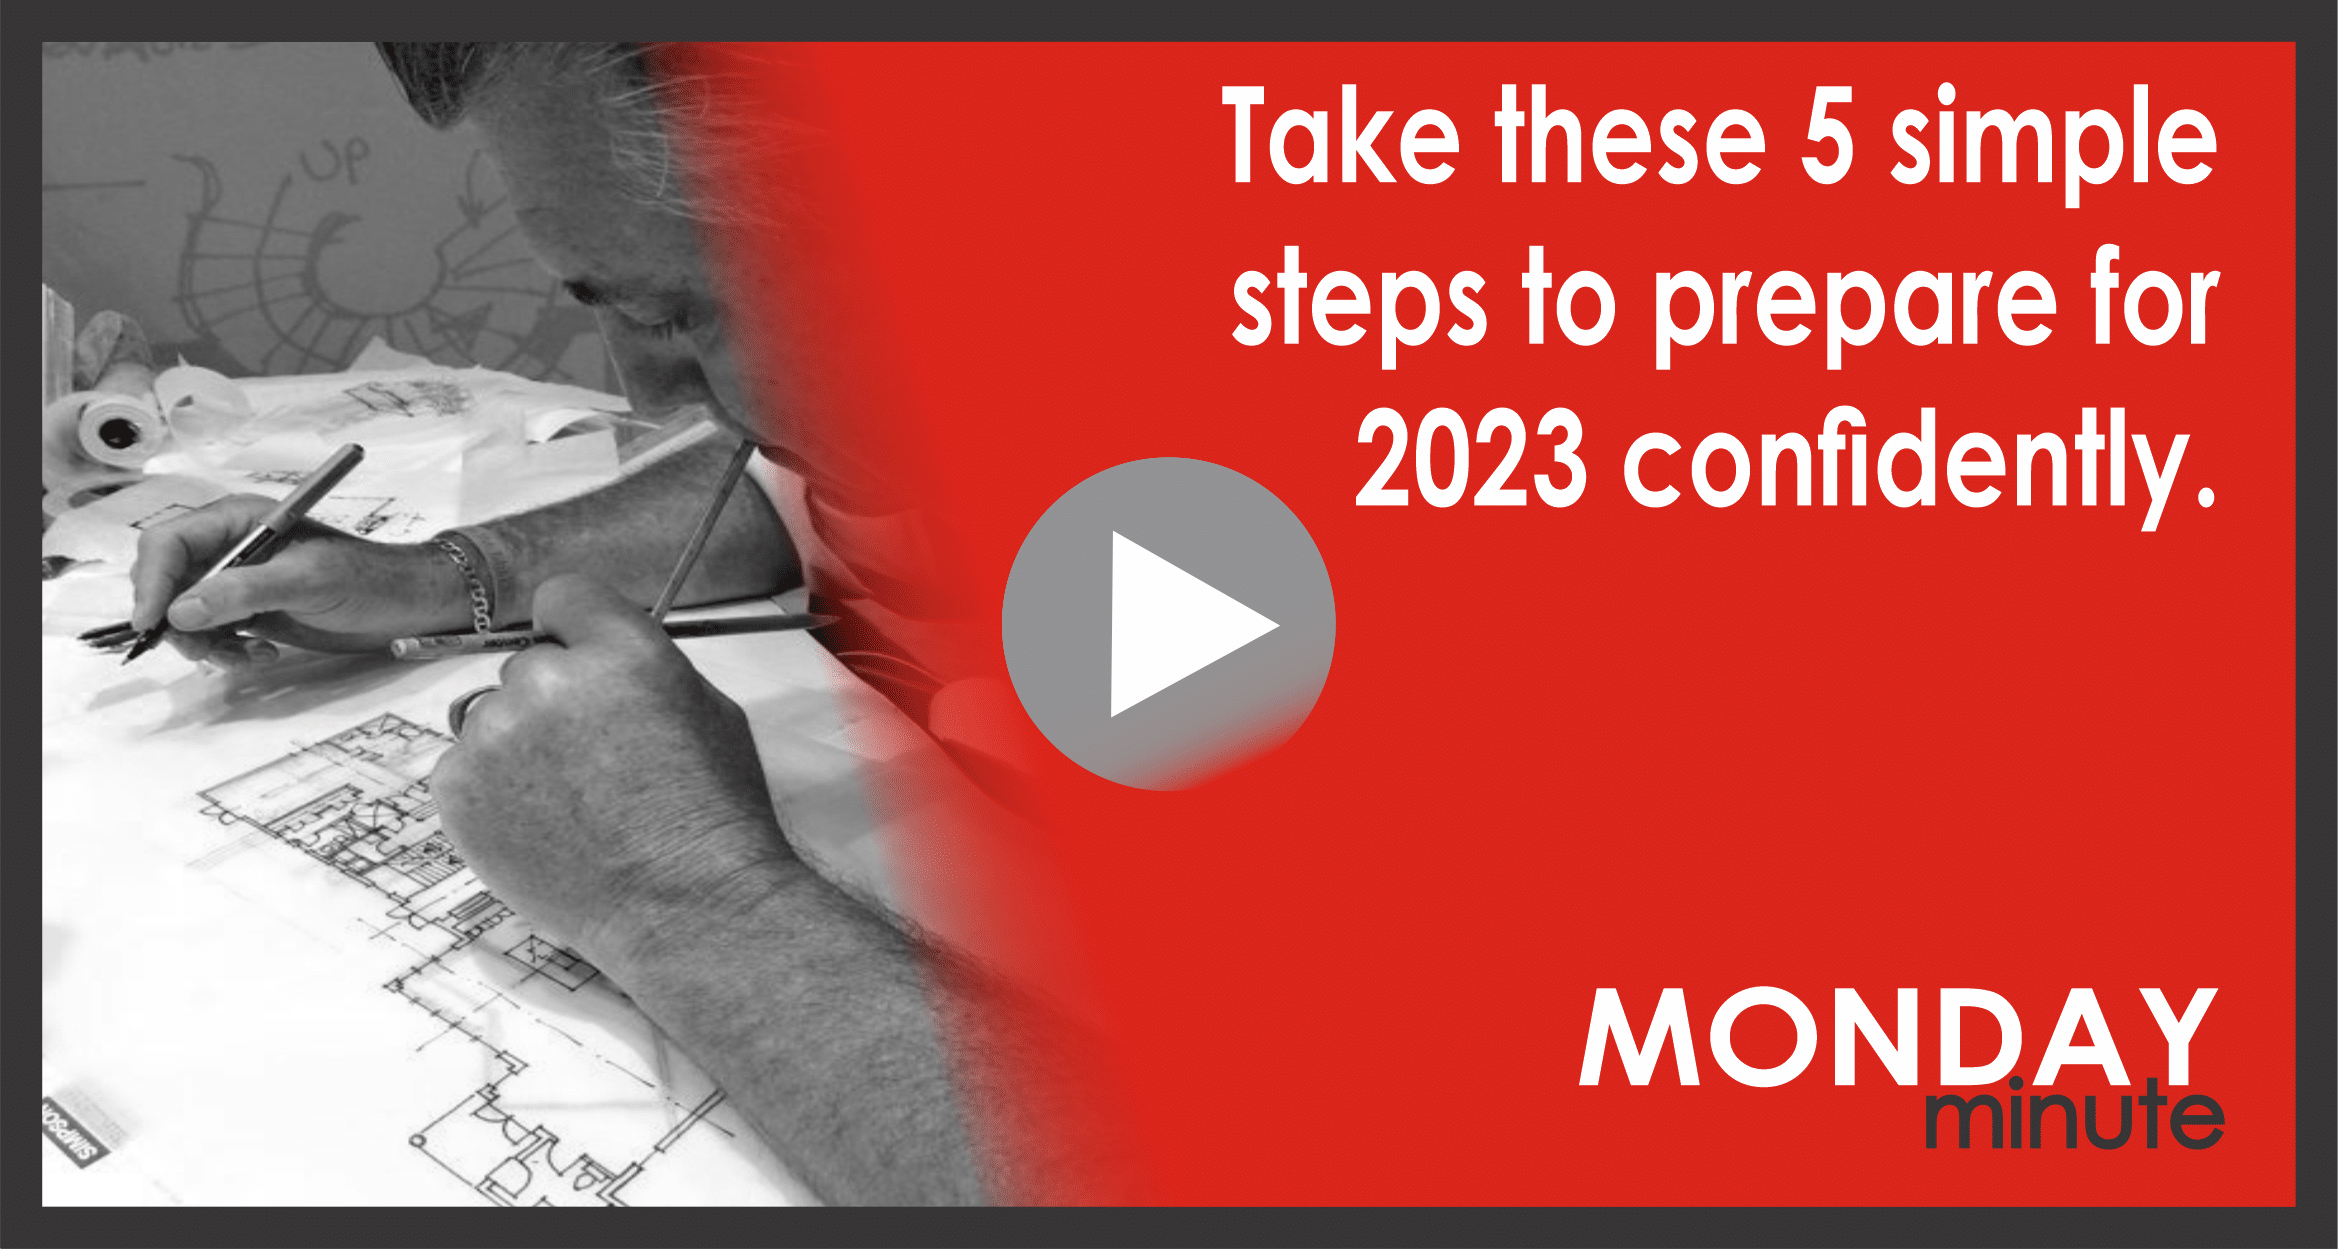 Take these 4 simple steps to prepare for 2023 confidently.